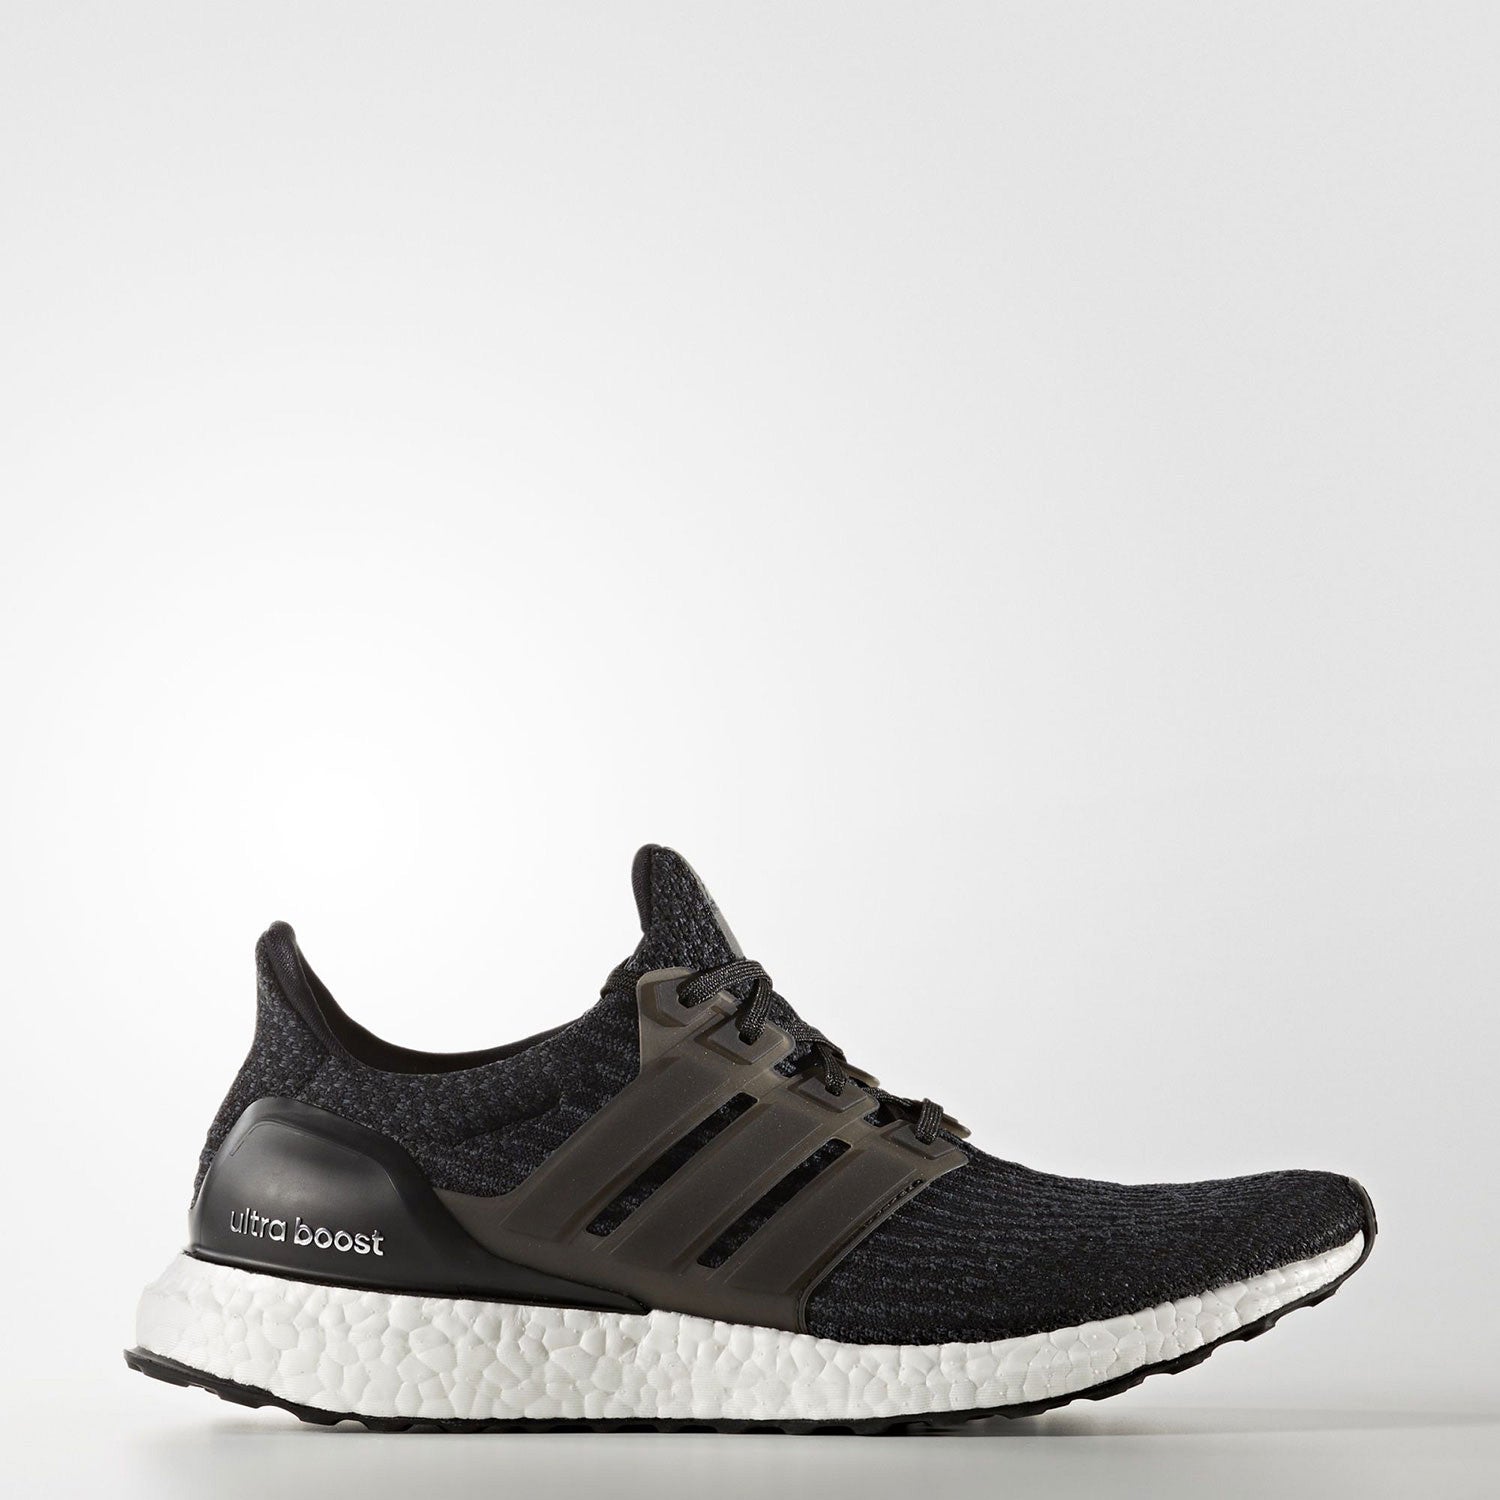 Ultra Boost Running Shoes | Altitude Sports